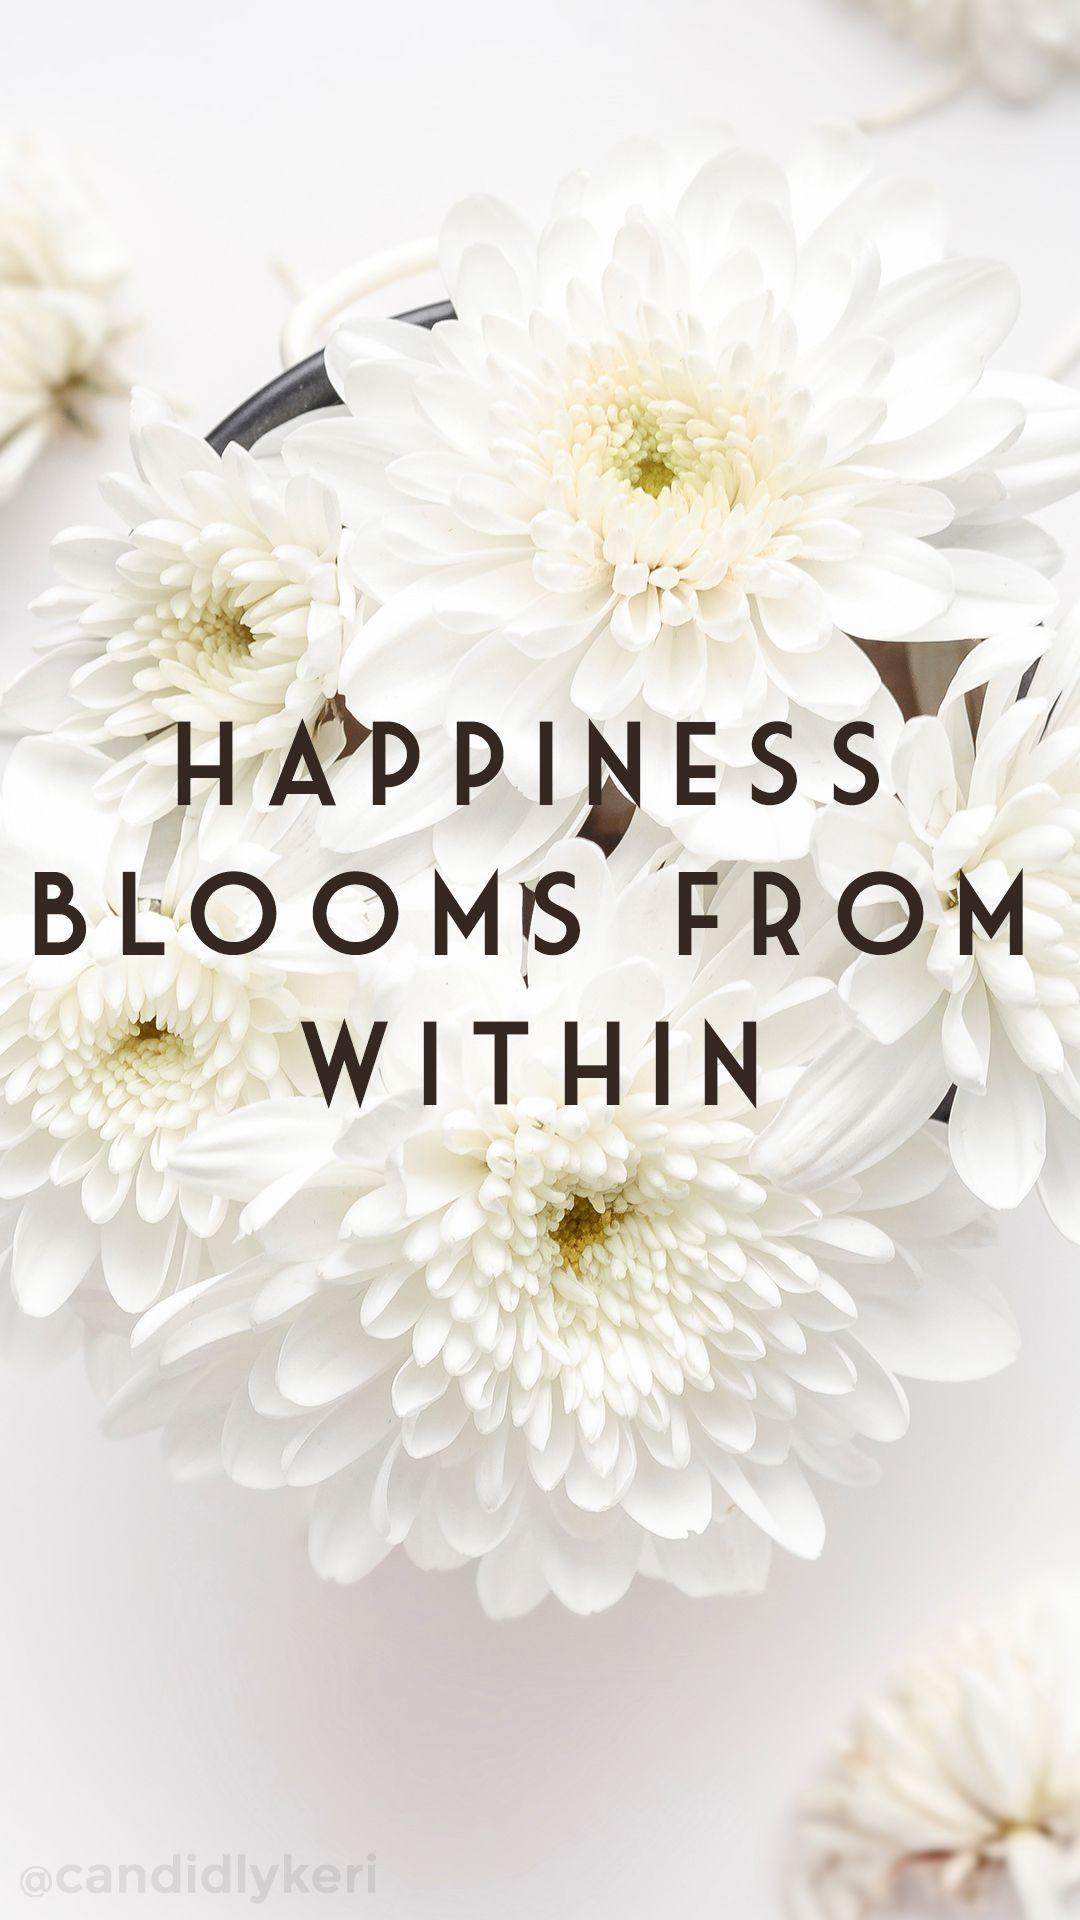 Flower Quote iPhone Wallpaper Free Flower Quote